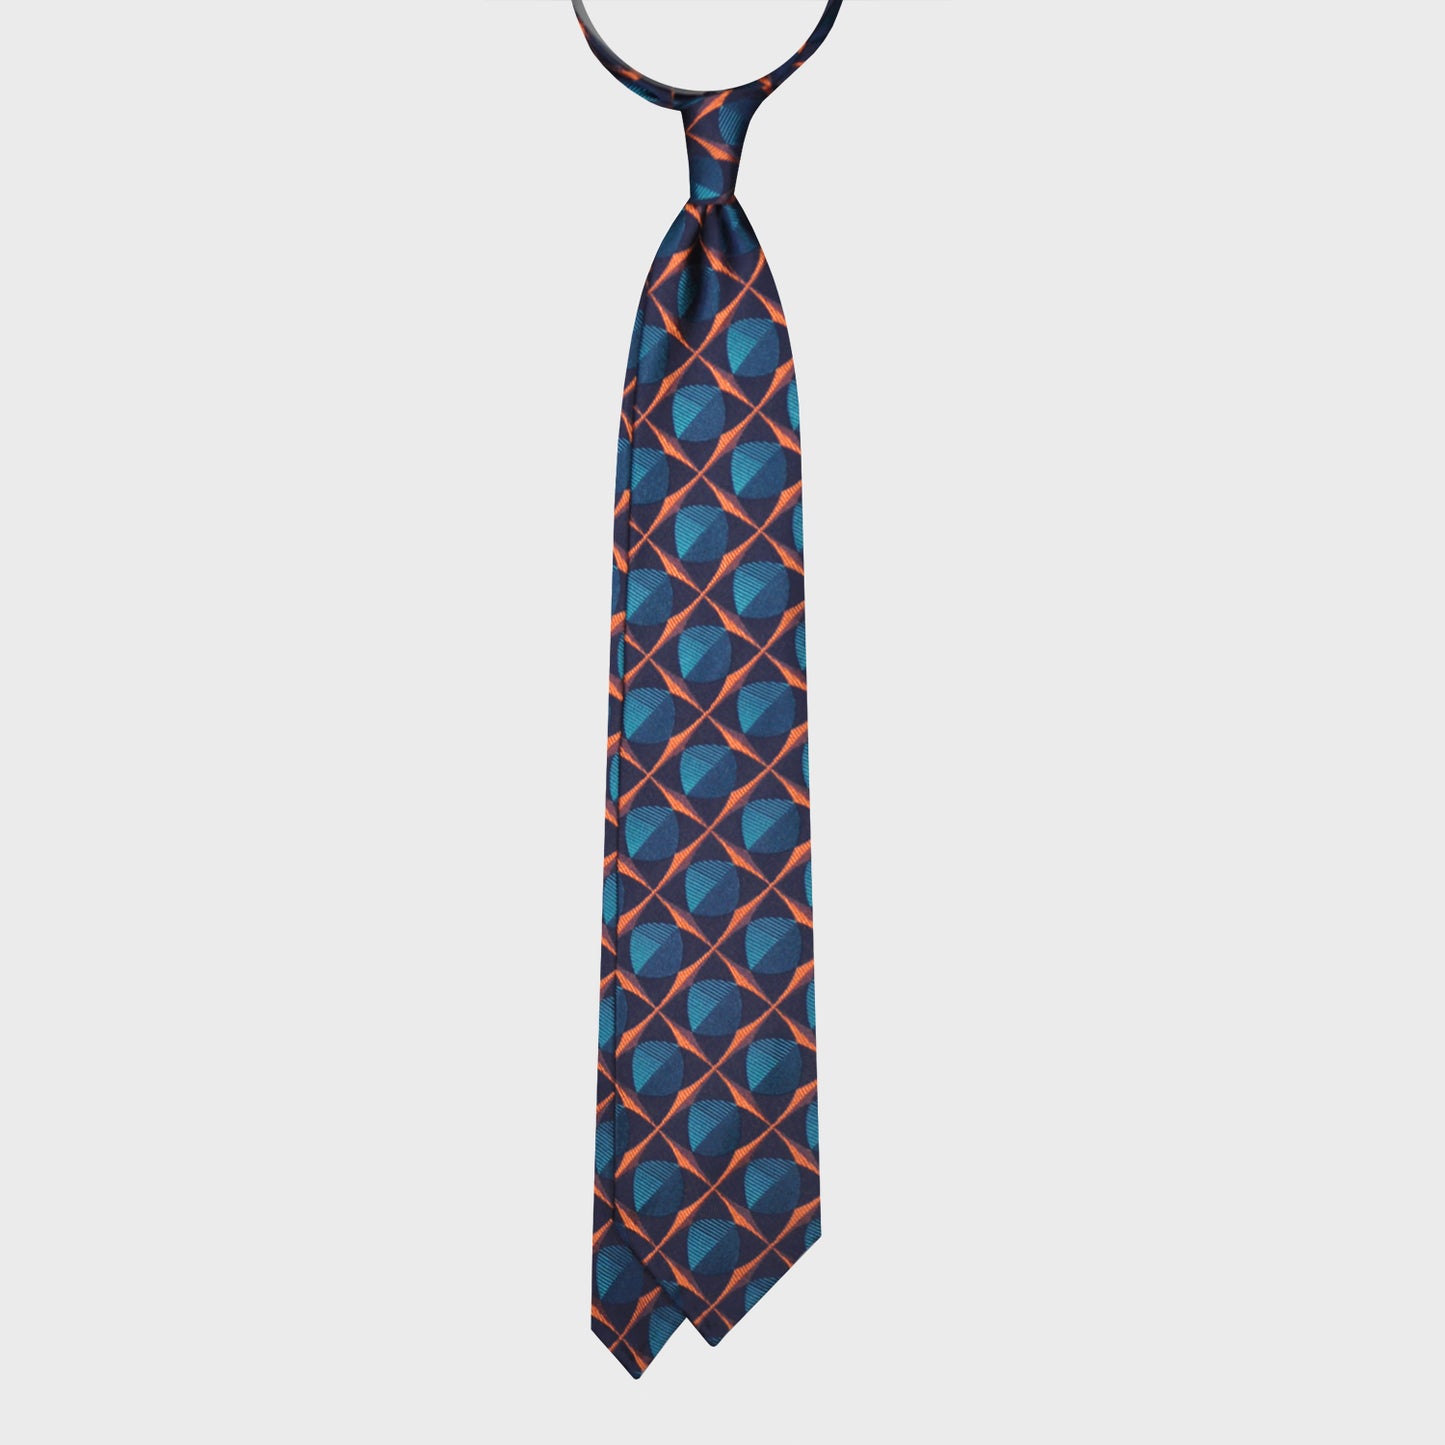 Load image into Gallery viewer, F.Marino Silk Tie 3 Folds Fantasy Pattern Curvy Rhombuses-Wools Boutique Uomo
